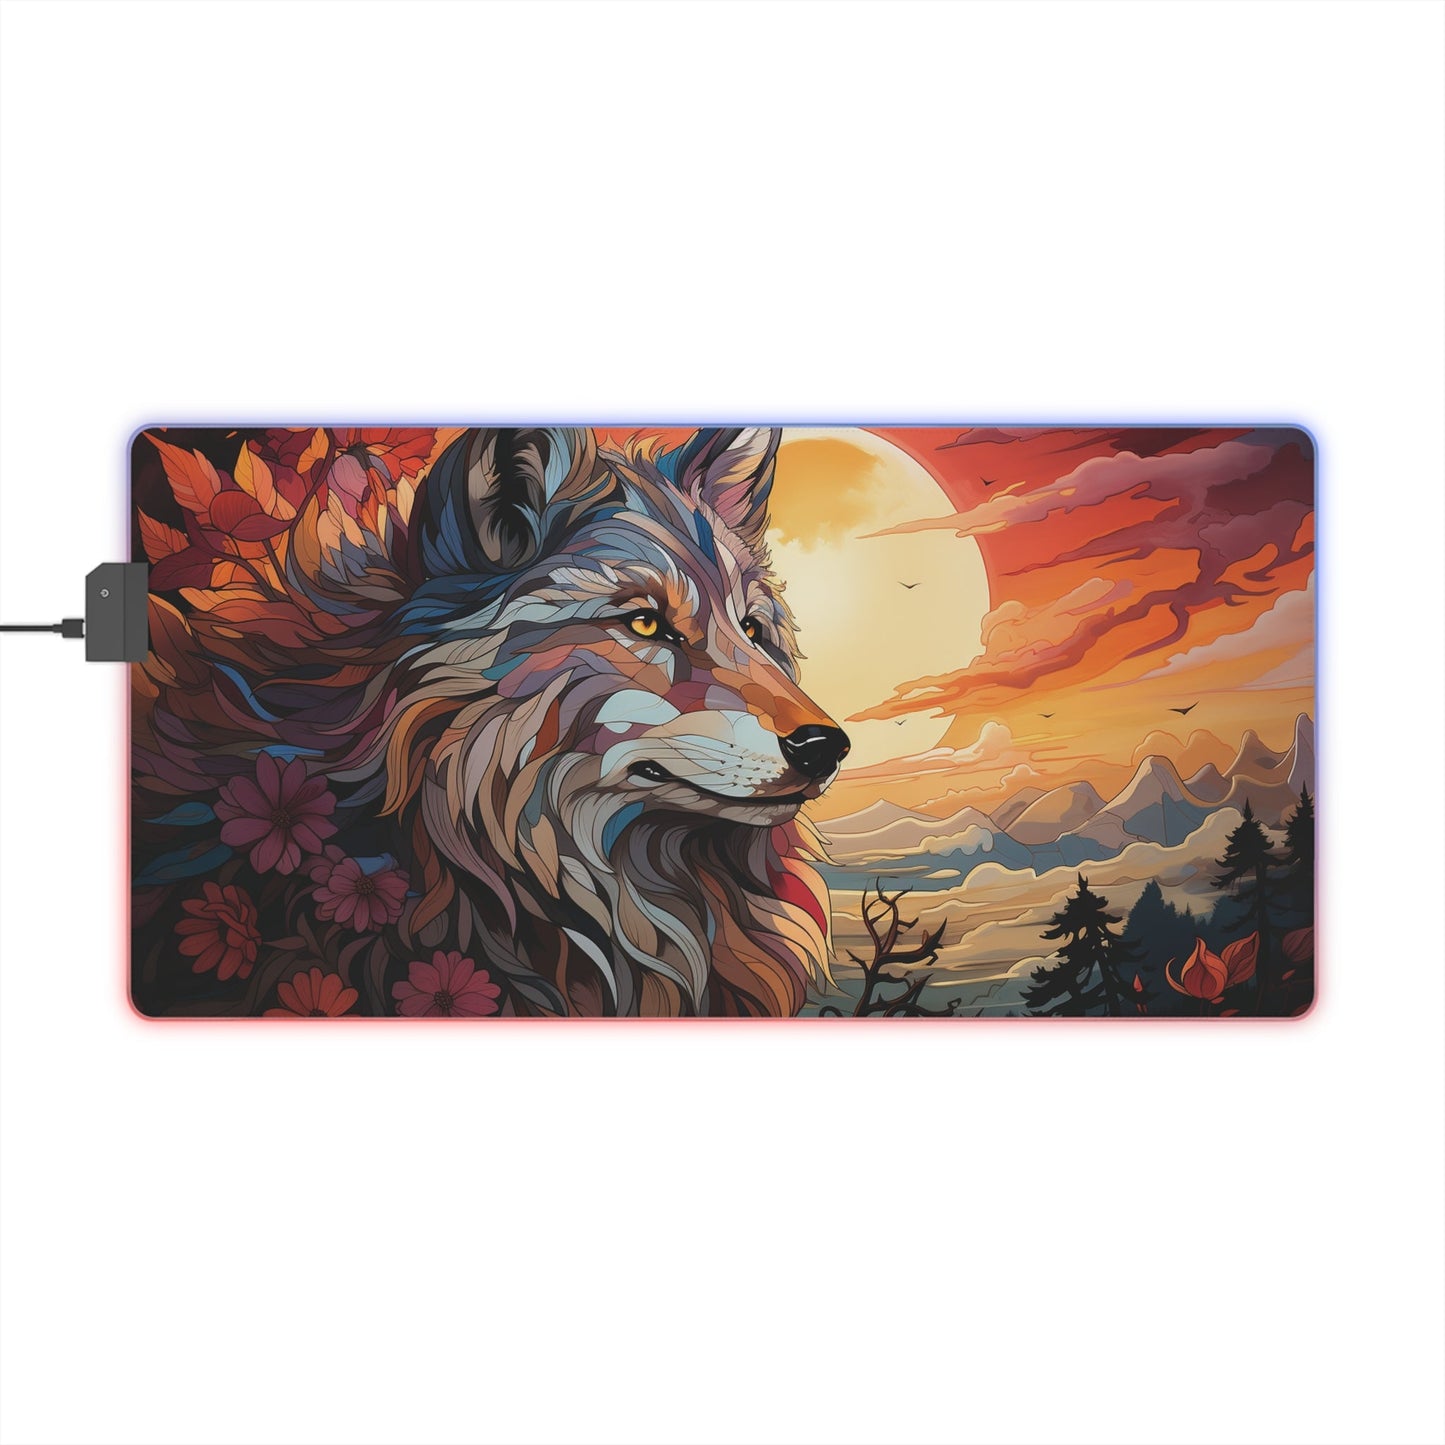 23.6 x 11.8 / Rectangle 2 Sun Wolf LED Gaming Mouse Pad